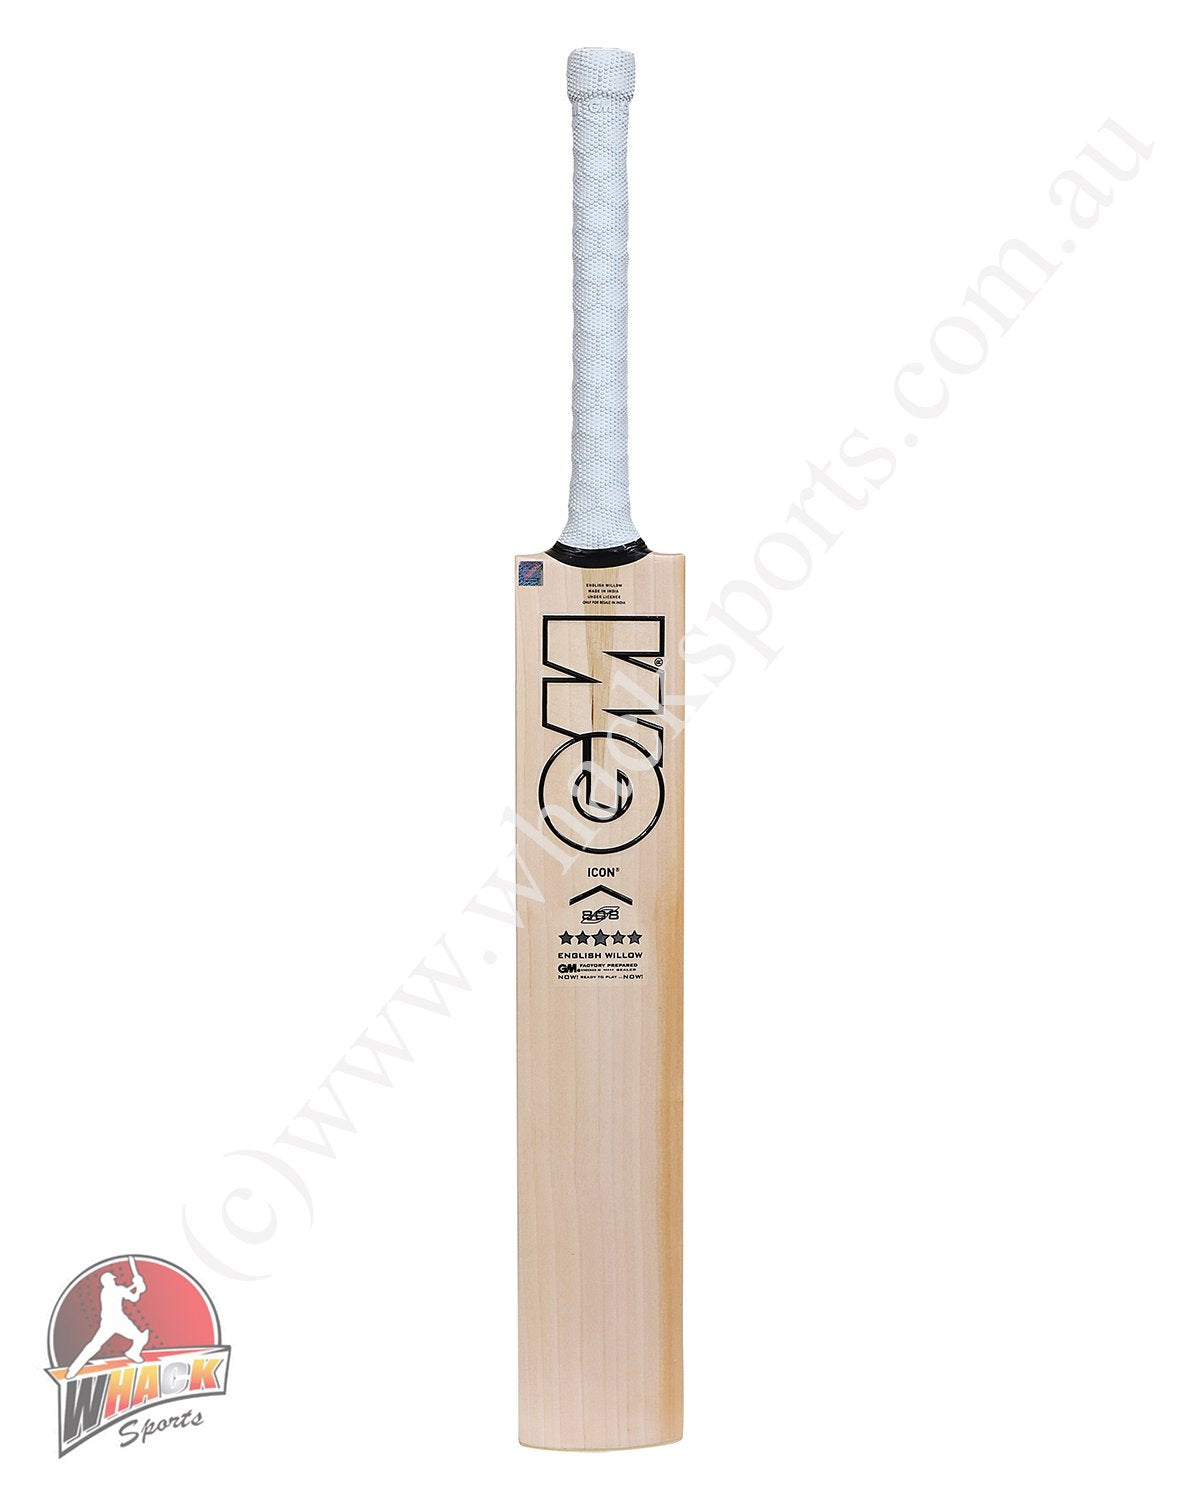 GM Eclipse 808 and Signature - Cricket Store Online